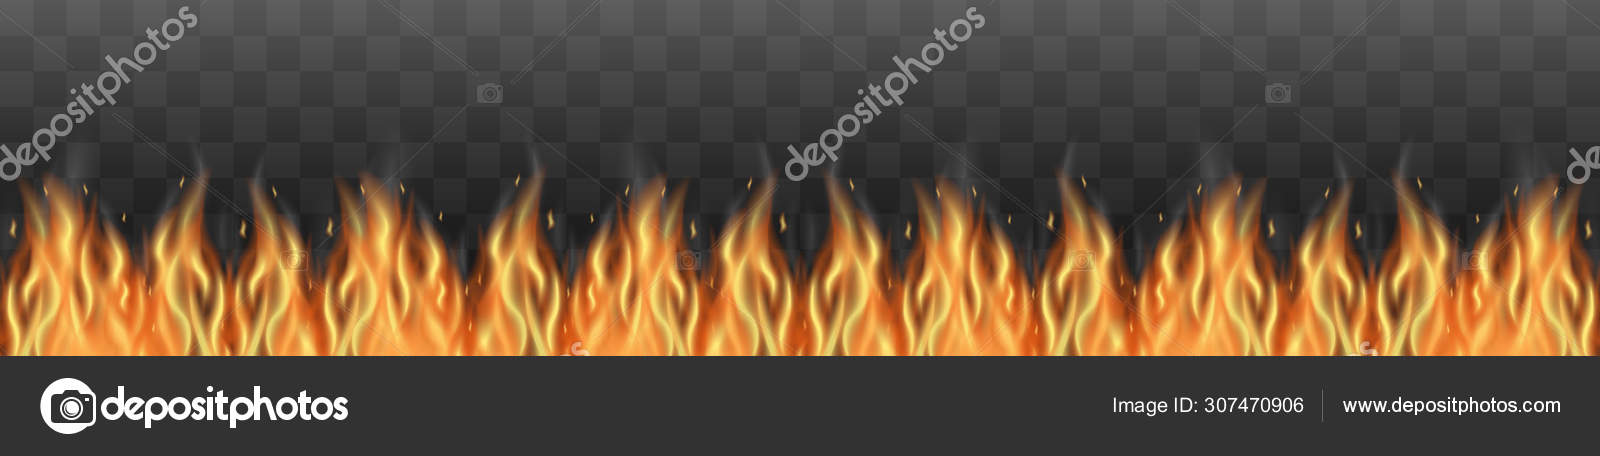 Long line of realistic fire flames isolated on black semi